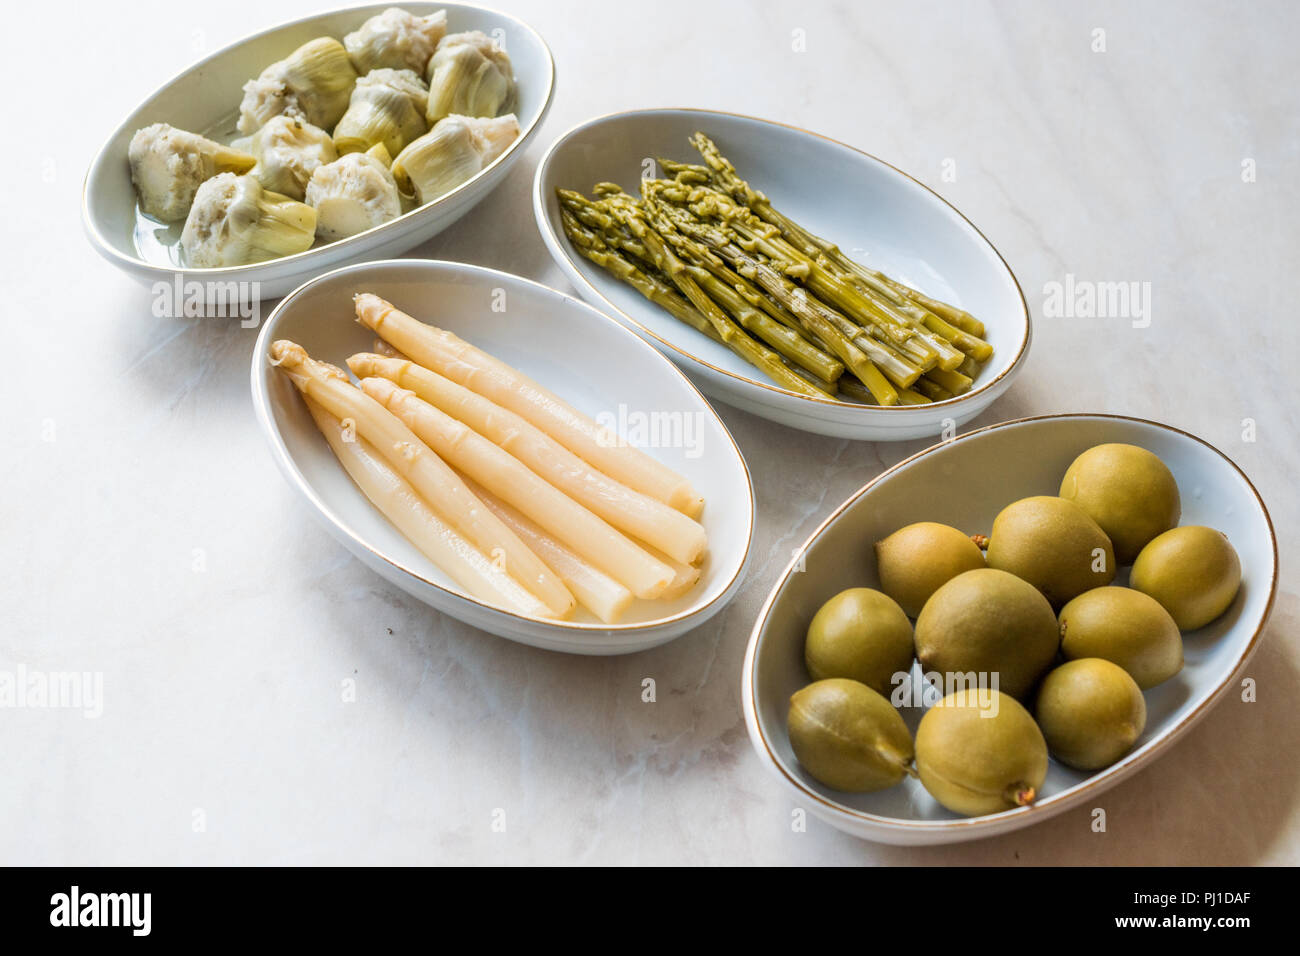 Pickled Vegetables Green and White Asparagus, Artichoke Heart and Unripe Green Almond Pickles in Plate. Organic Food. Stock Photo